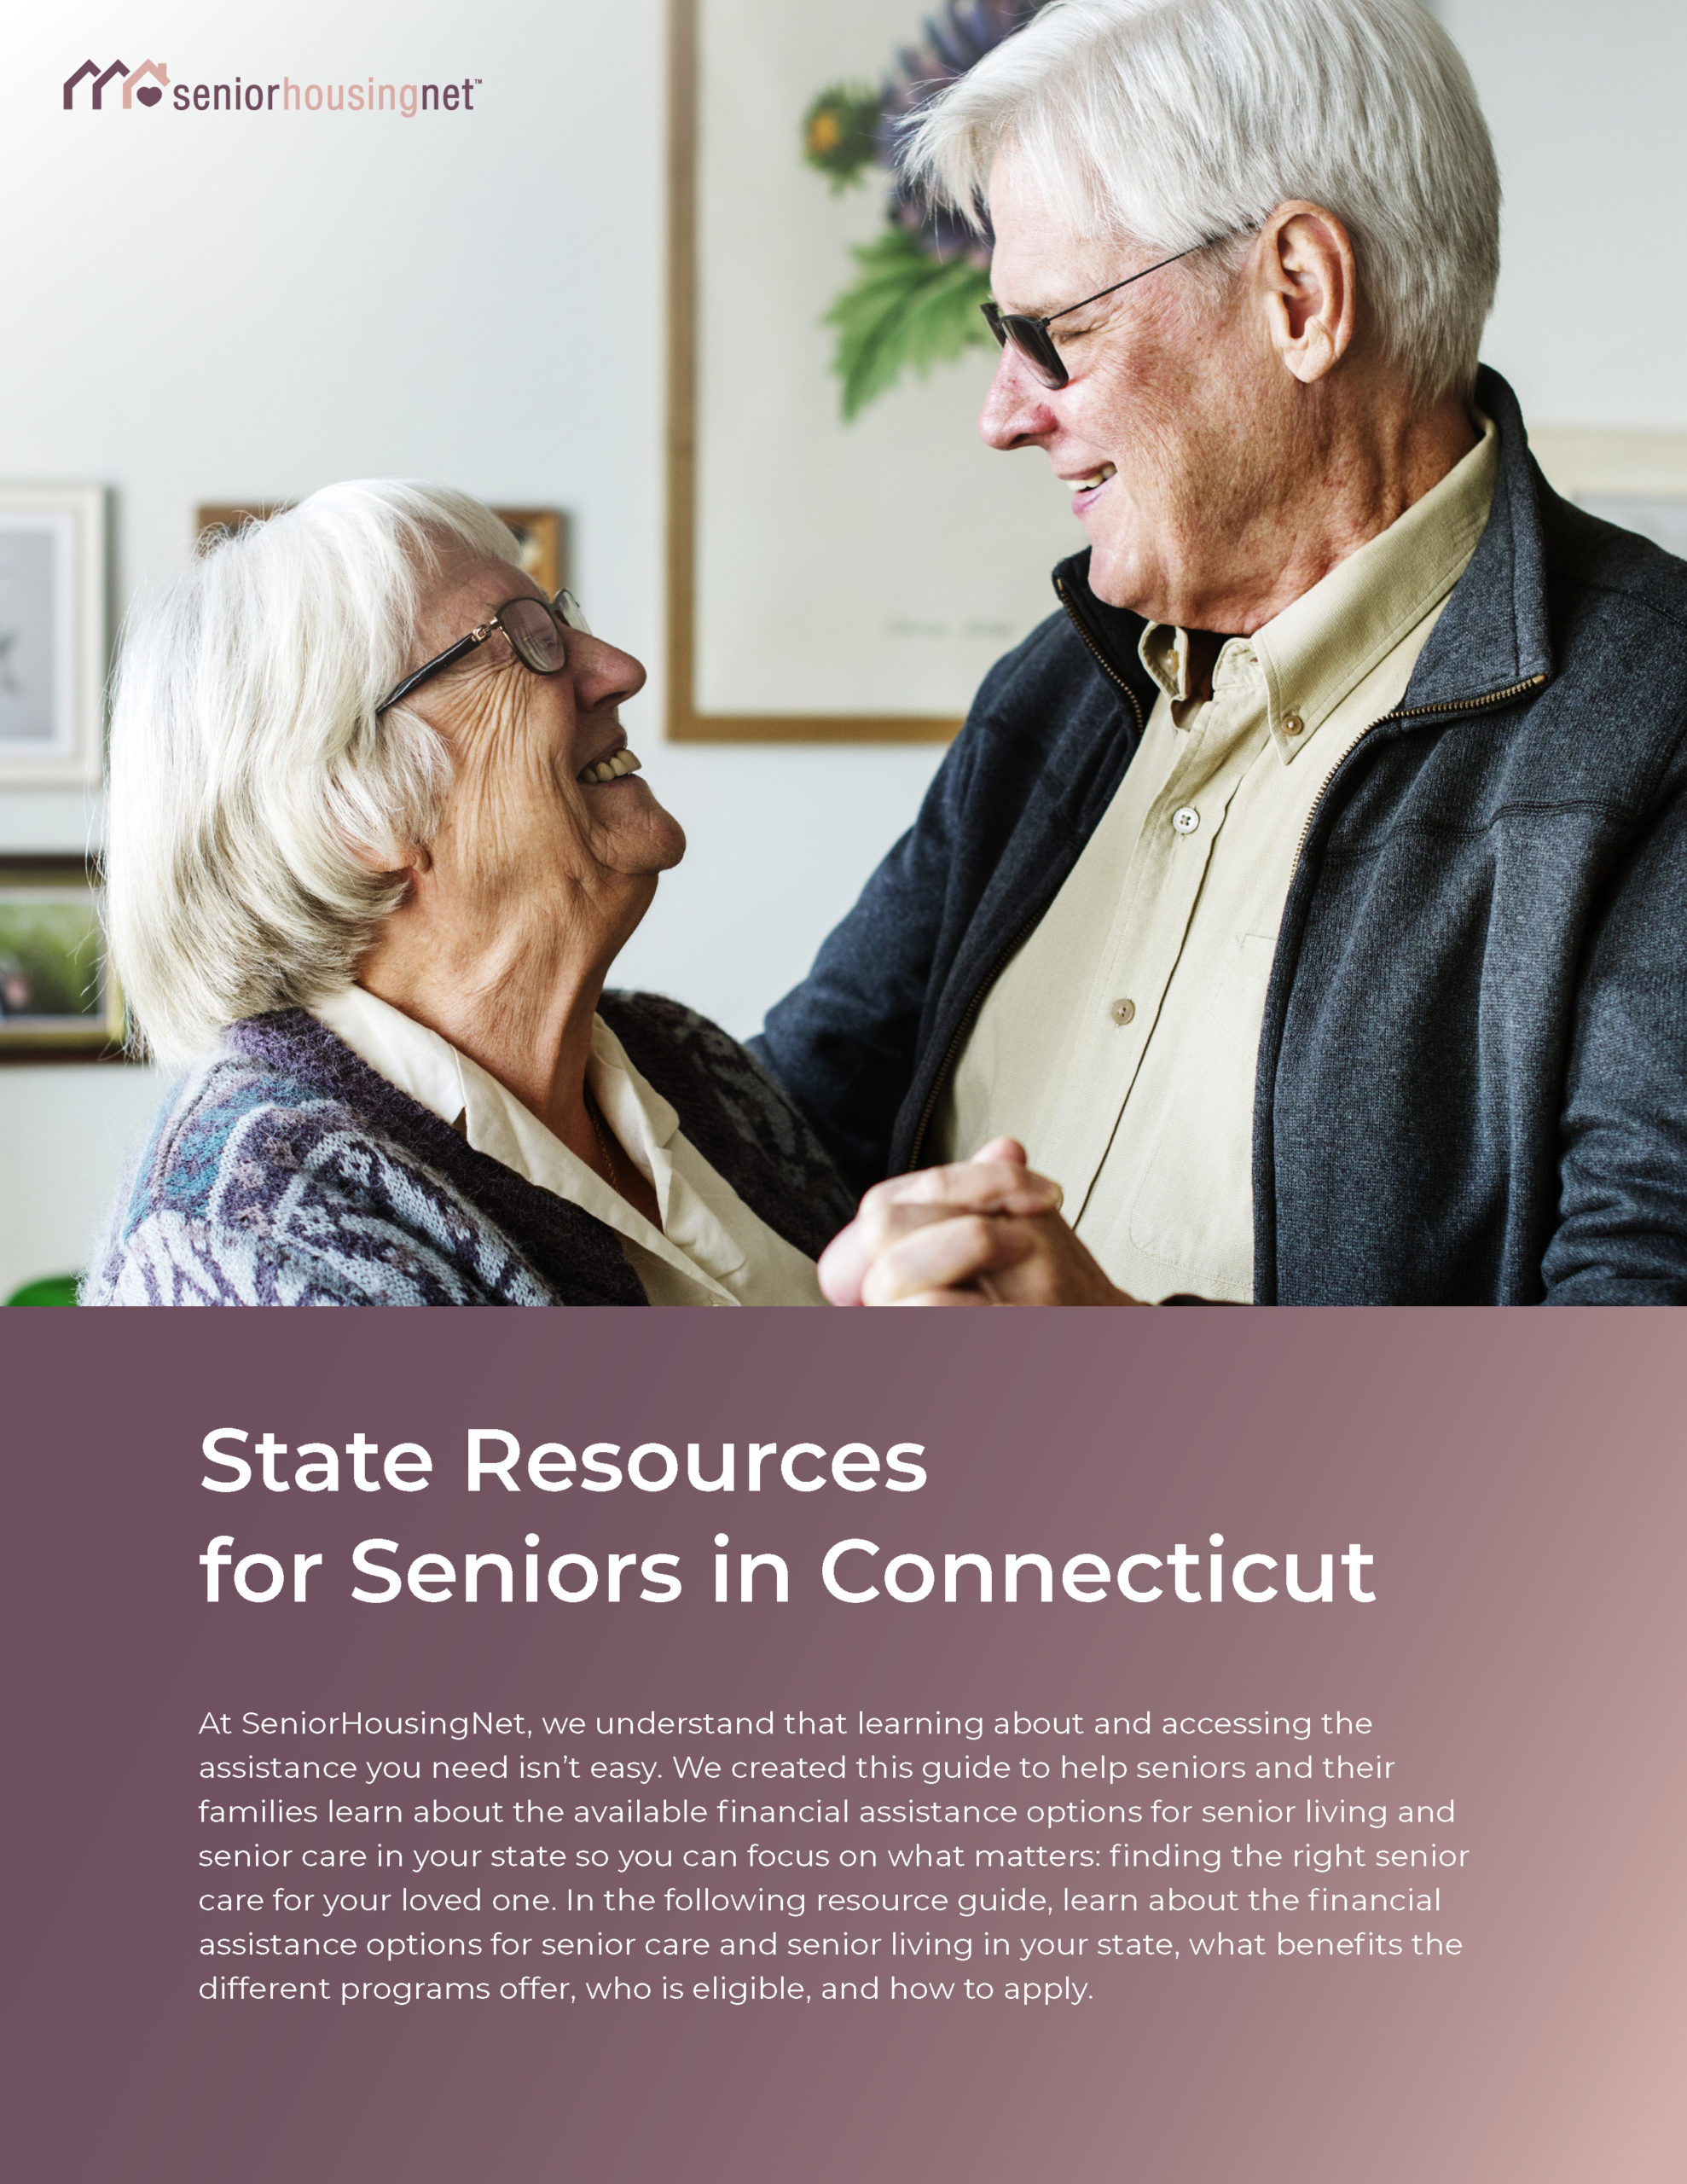 State Resources for Seniors in Connecticut